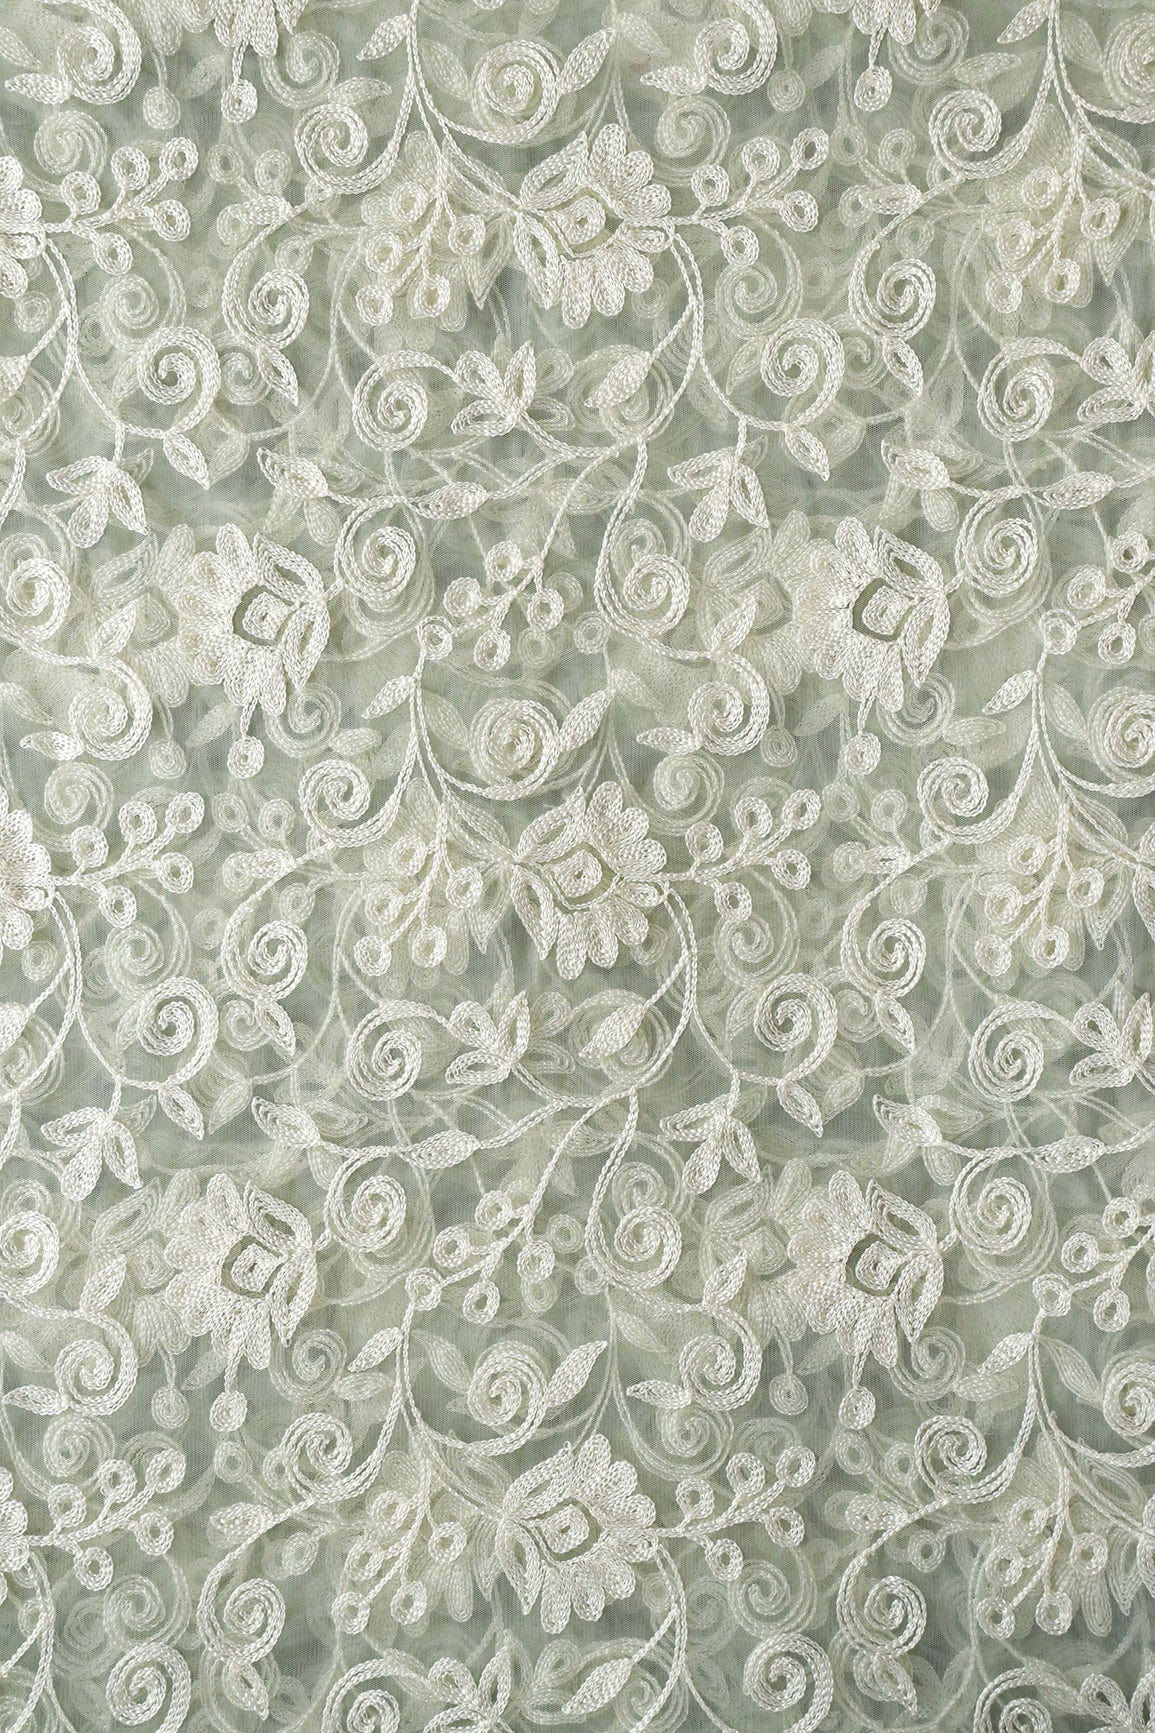 doeraa Embroidery Fabrics White Thread Beautiful Heavy Floral Embroidery On Dusty Olive Soft Net Fabric